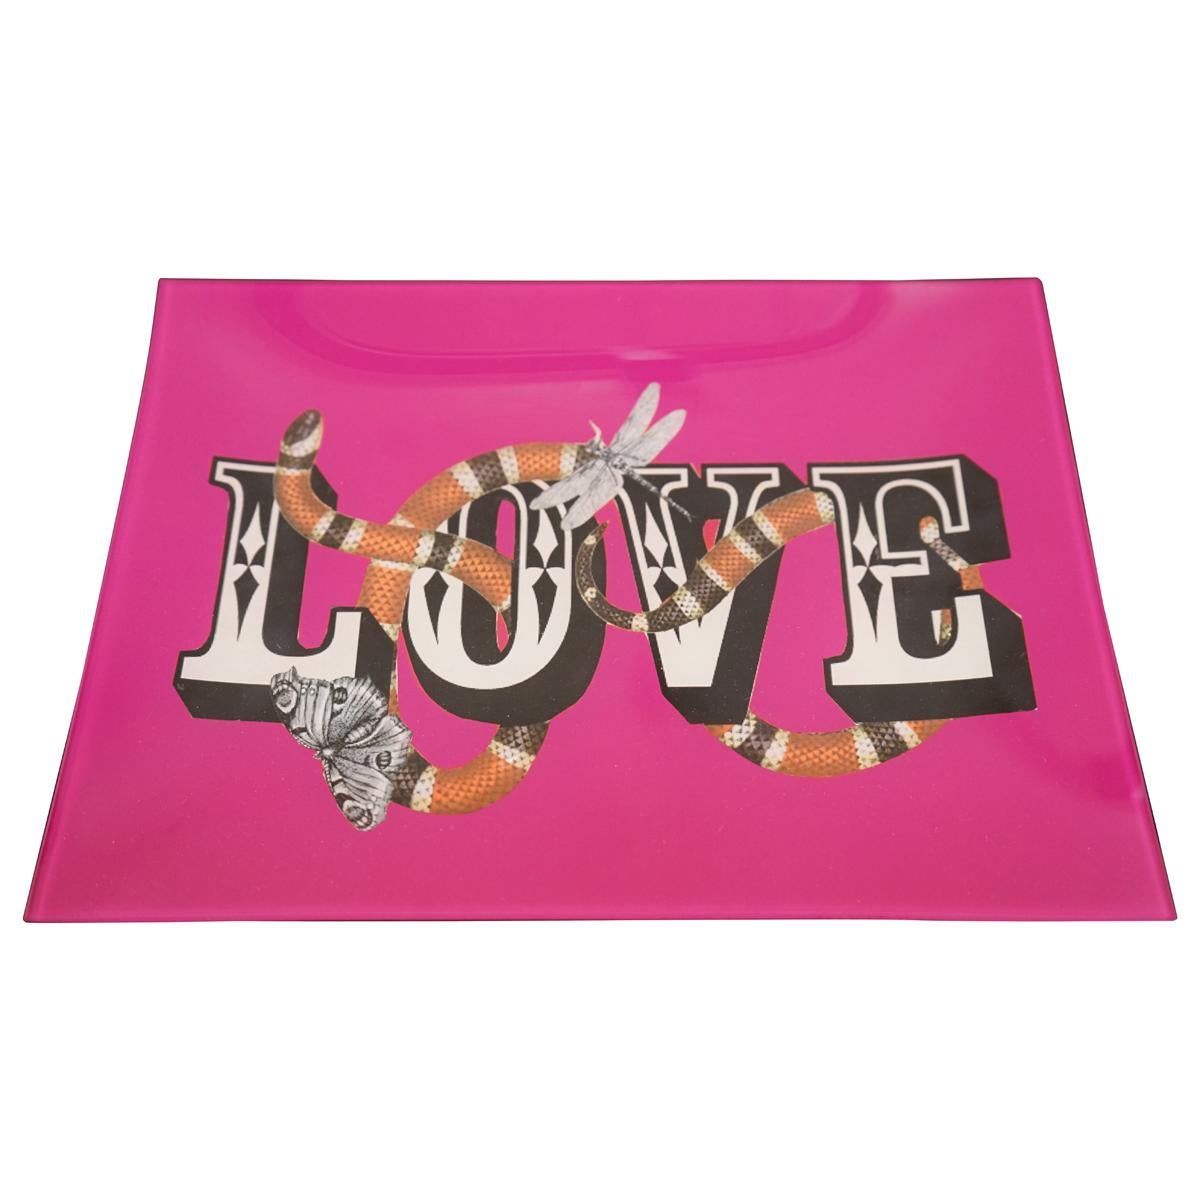 Contemporary Pink Tray Featuring Snake, Insect, and "LOVE" Design